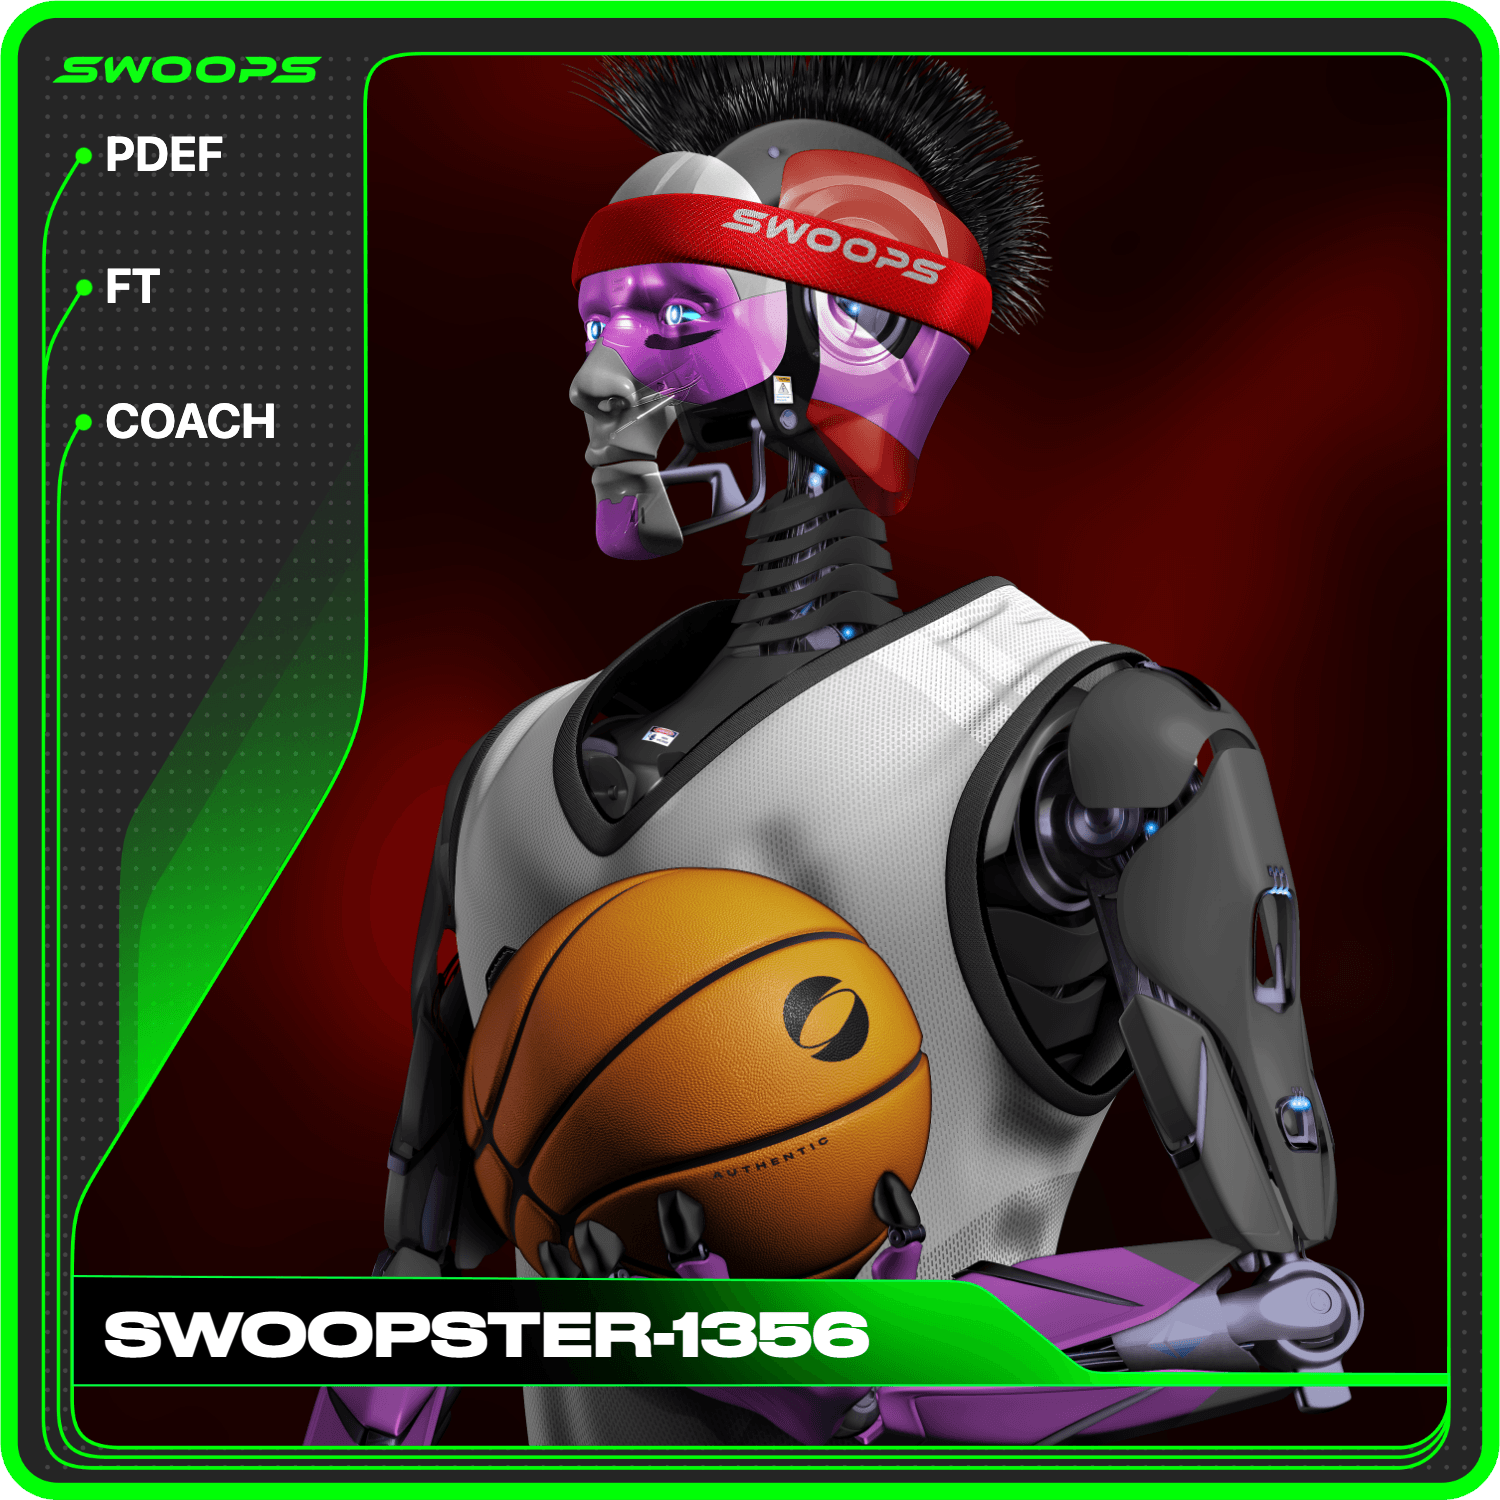 SWOOPSTER-1356